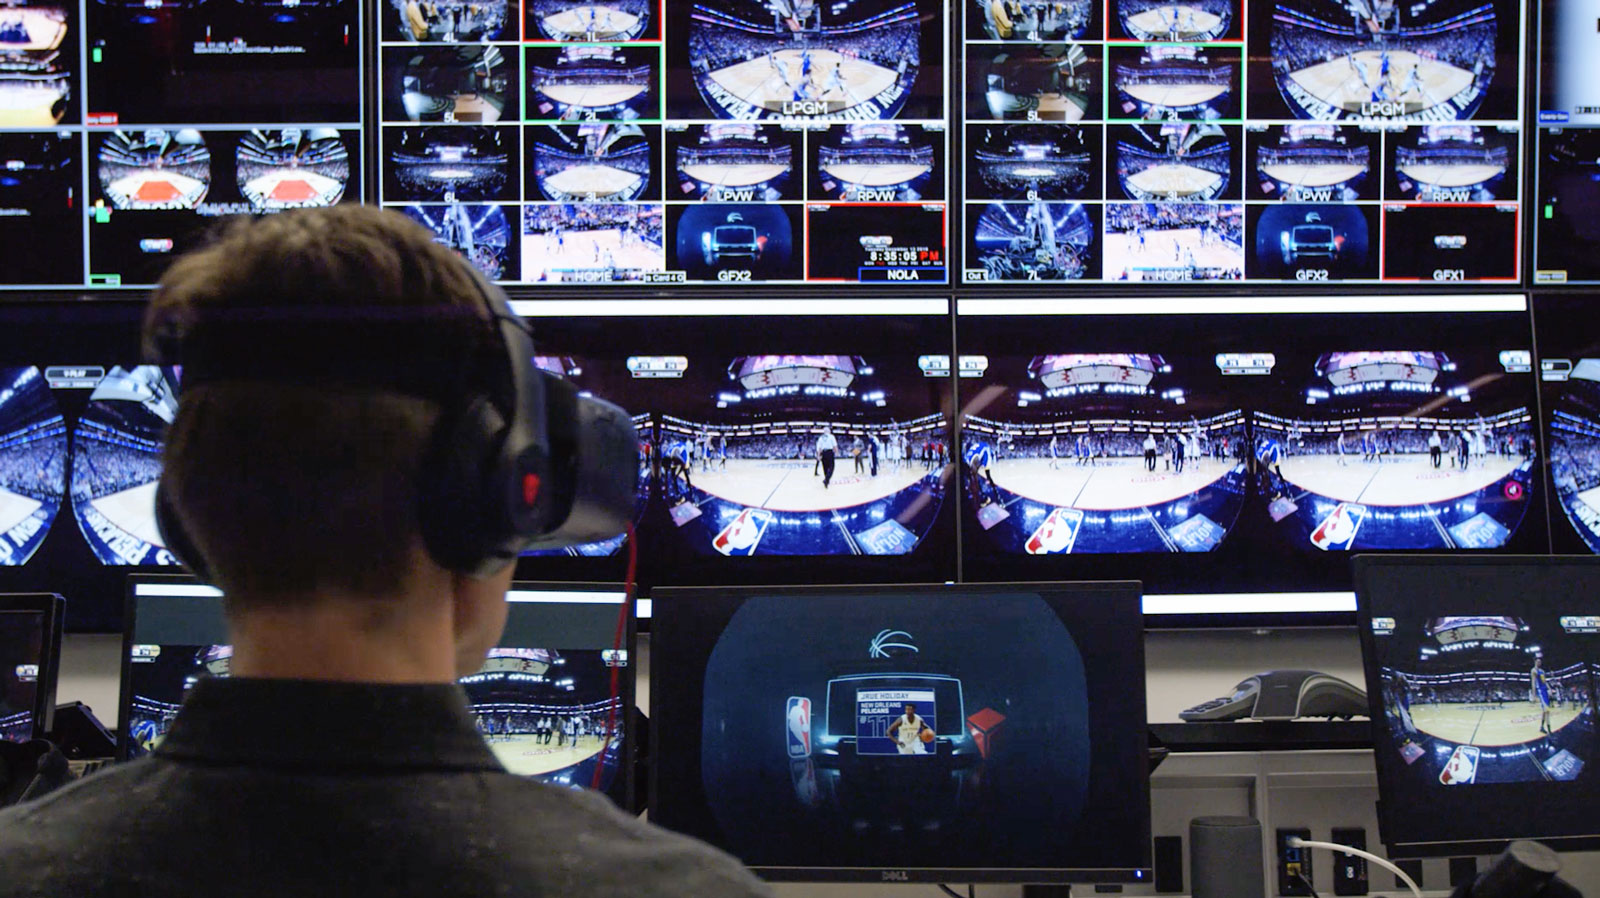 The NBA hopes VR will expand its audience